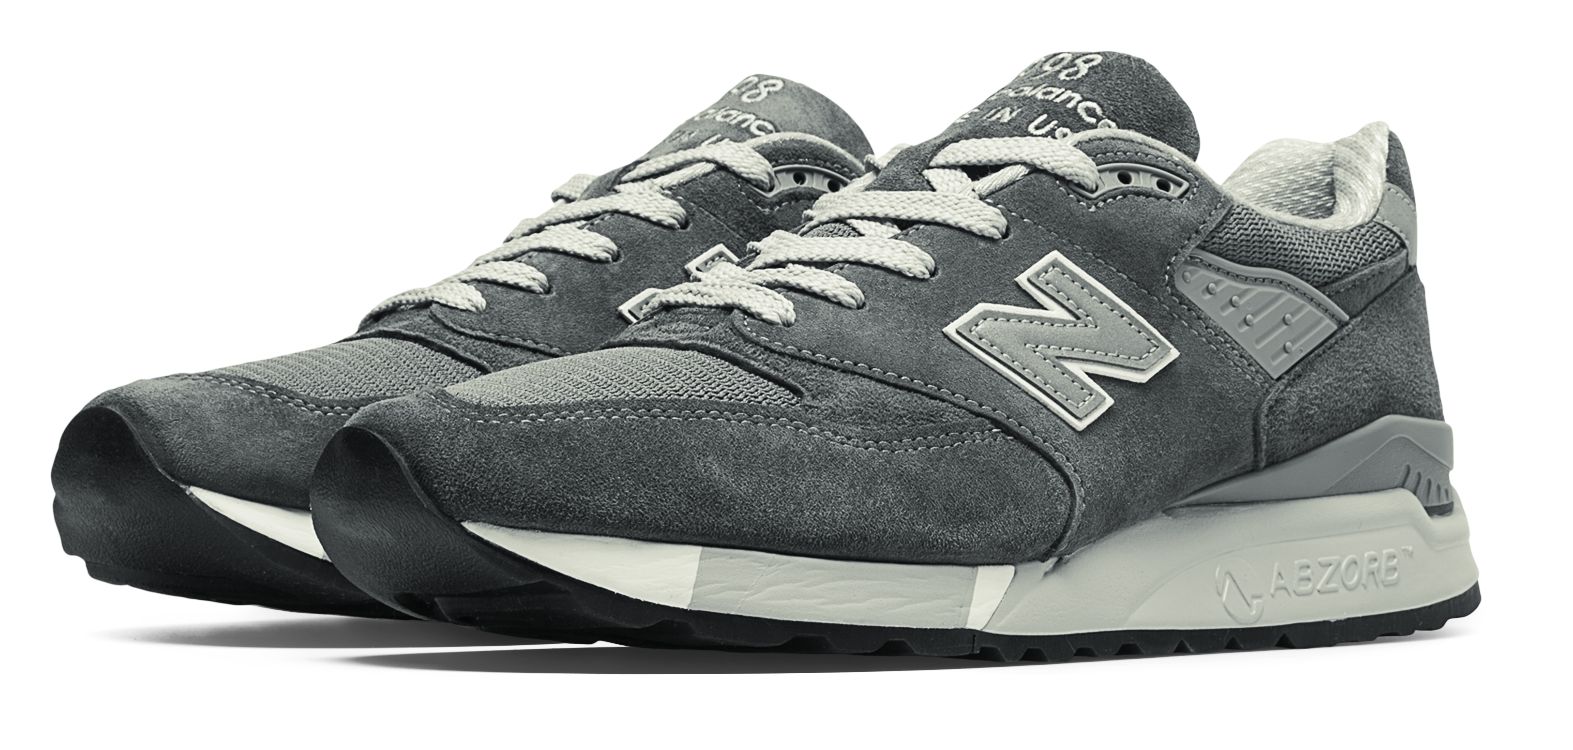 New Balance 998 Men’s Made In Usa Shoes | Meemba